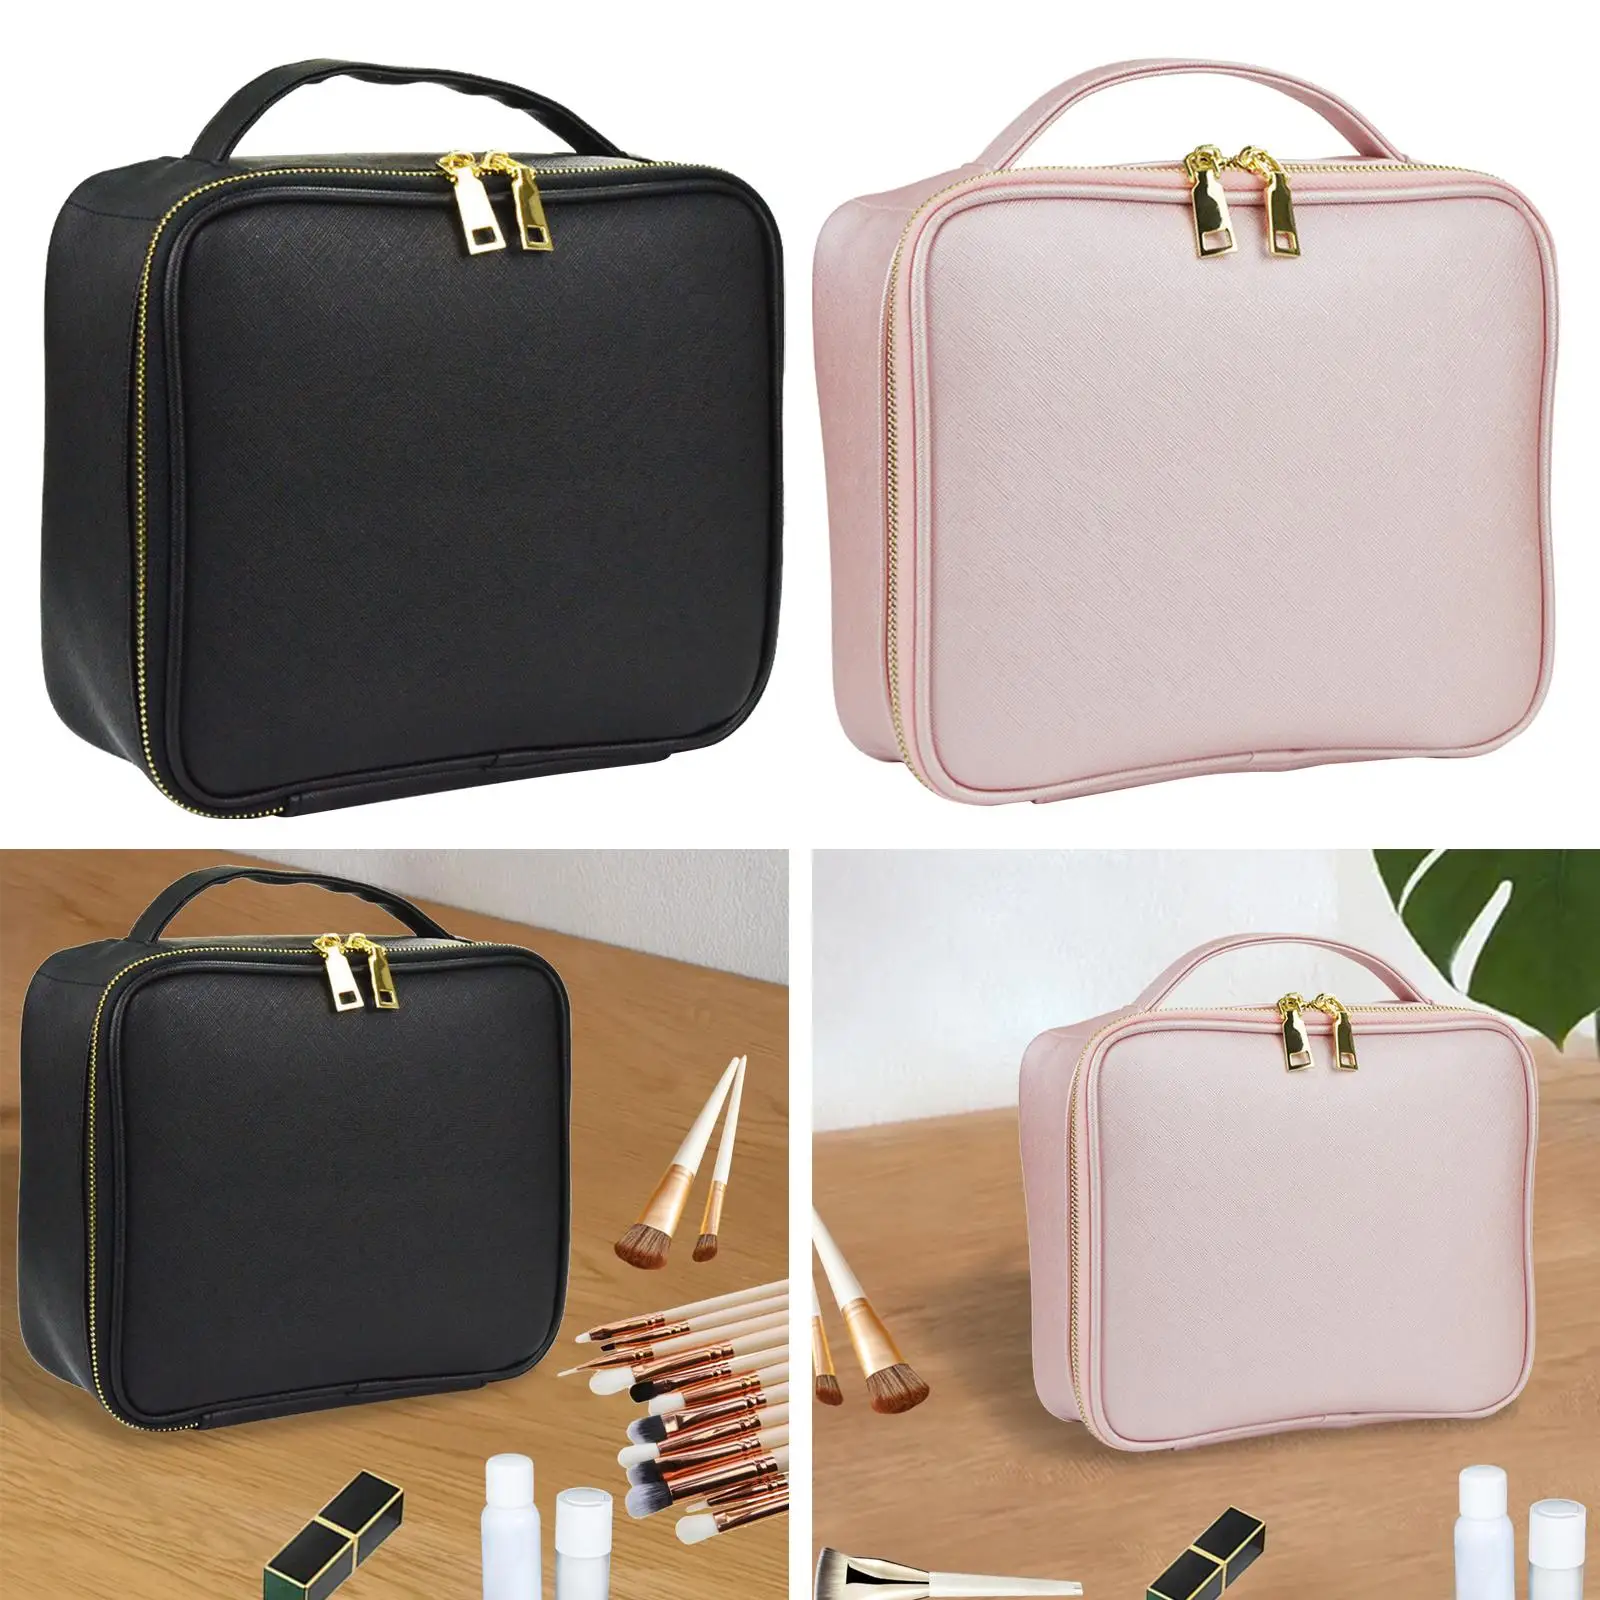 Travel Toiletry Case Storage Large Capacity Waterproof Container with Dividers Washable PU Portable for Toiletries Shampoo Women